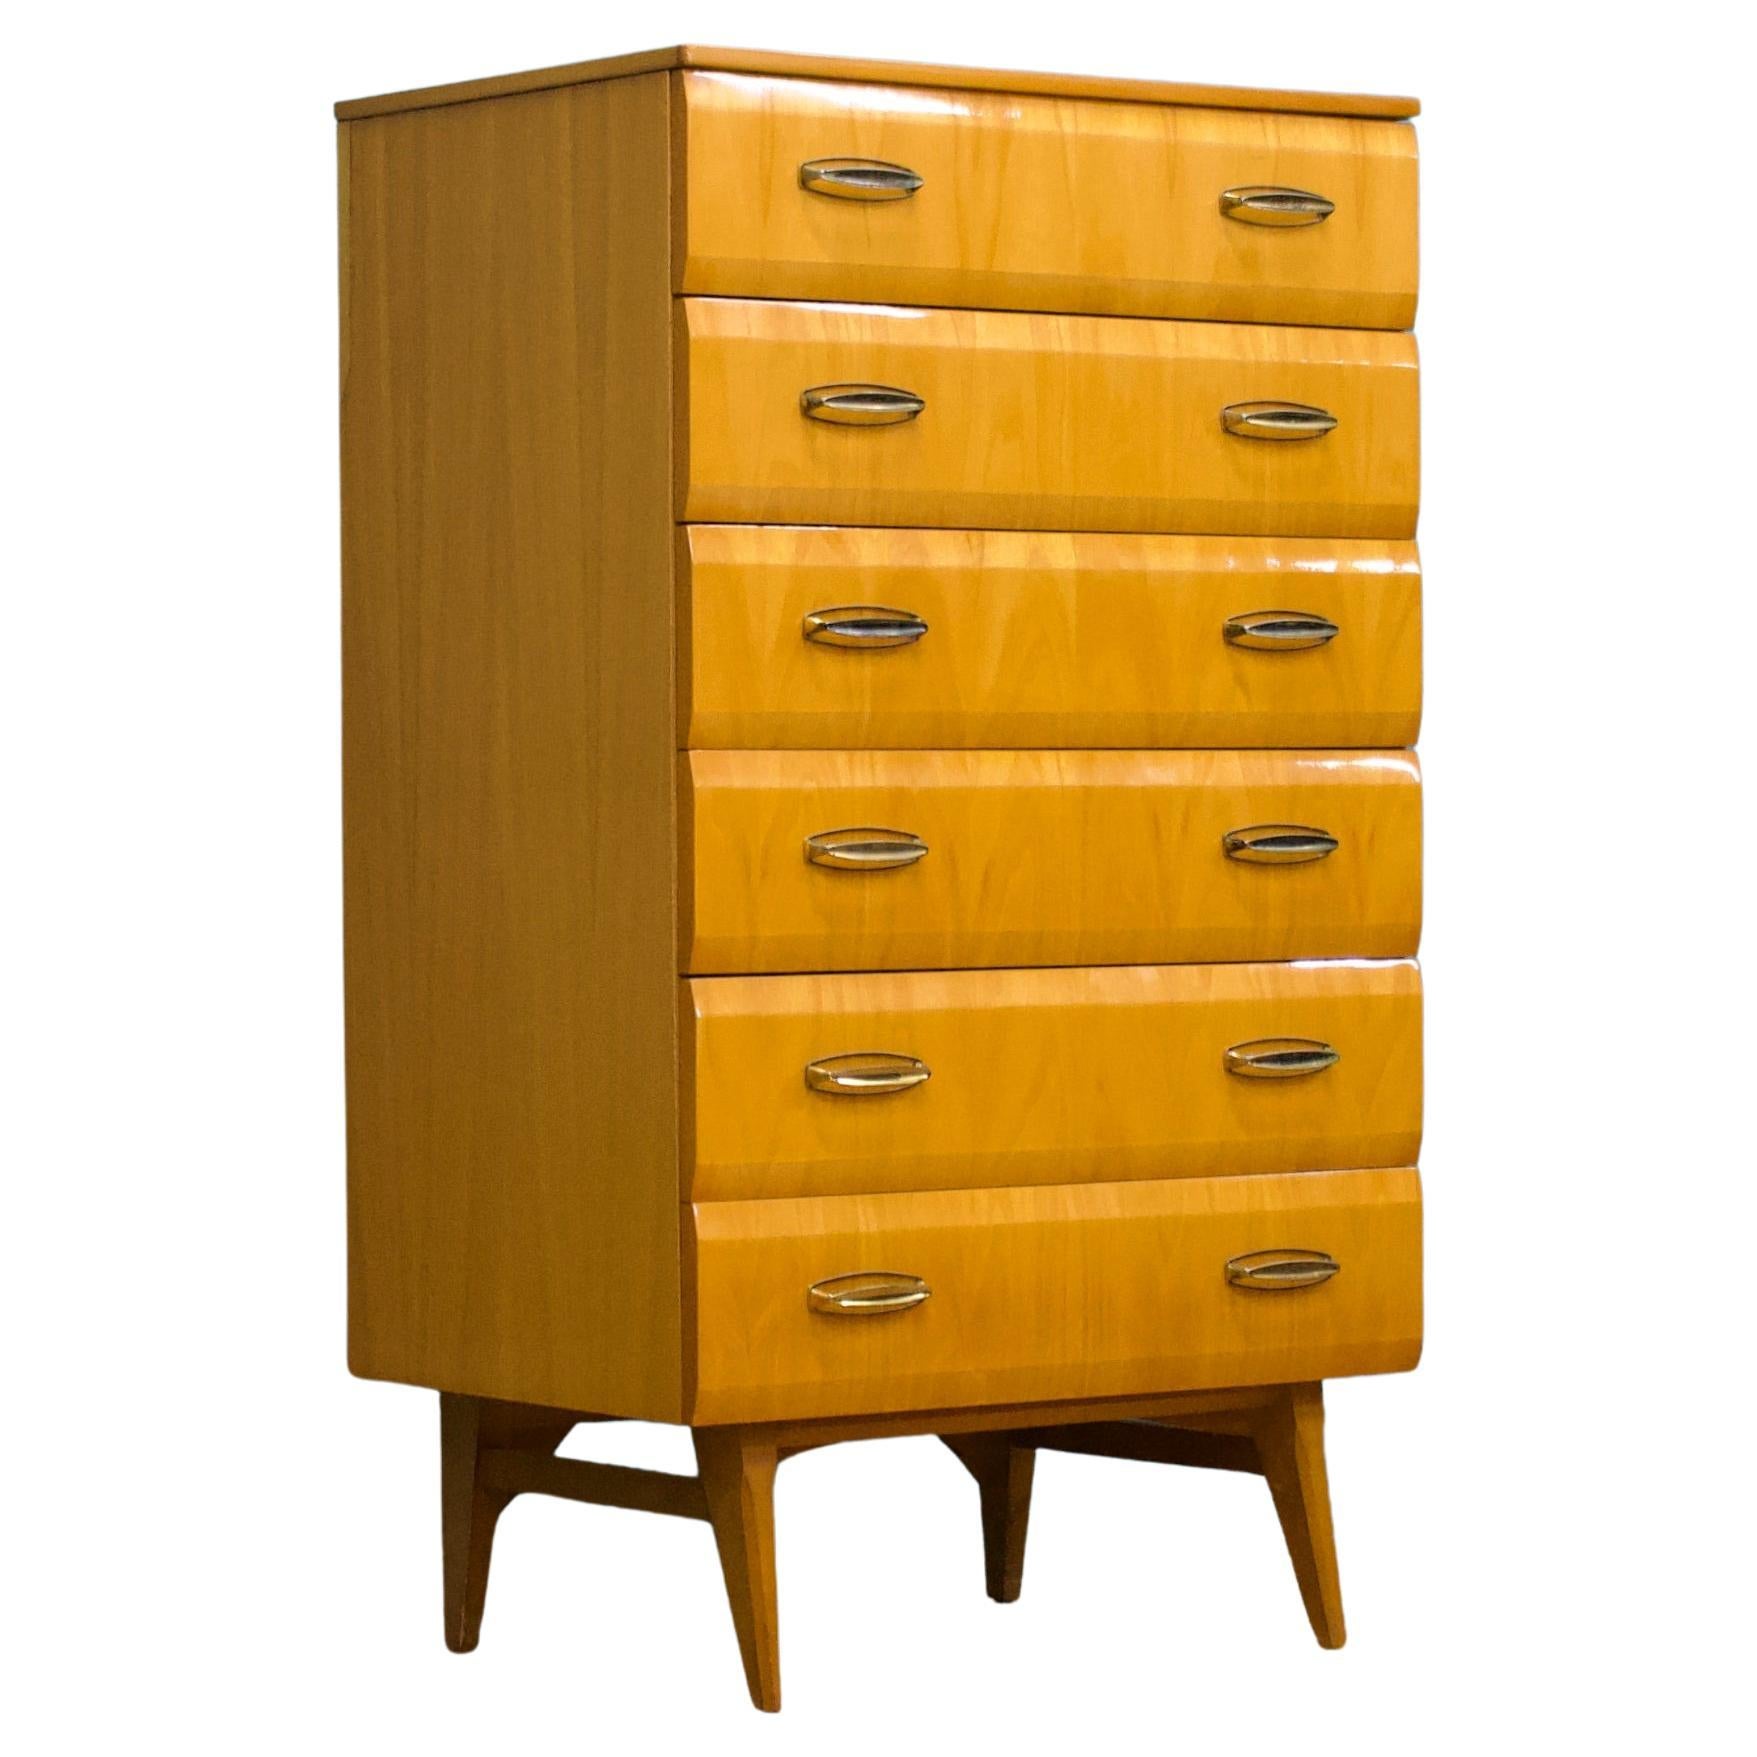 Midcentury, Maple Tallboy Chest of Drawers by Meredew, 1960s For Sale